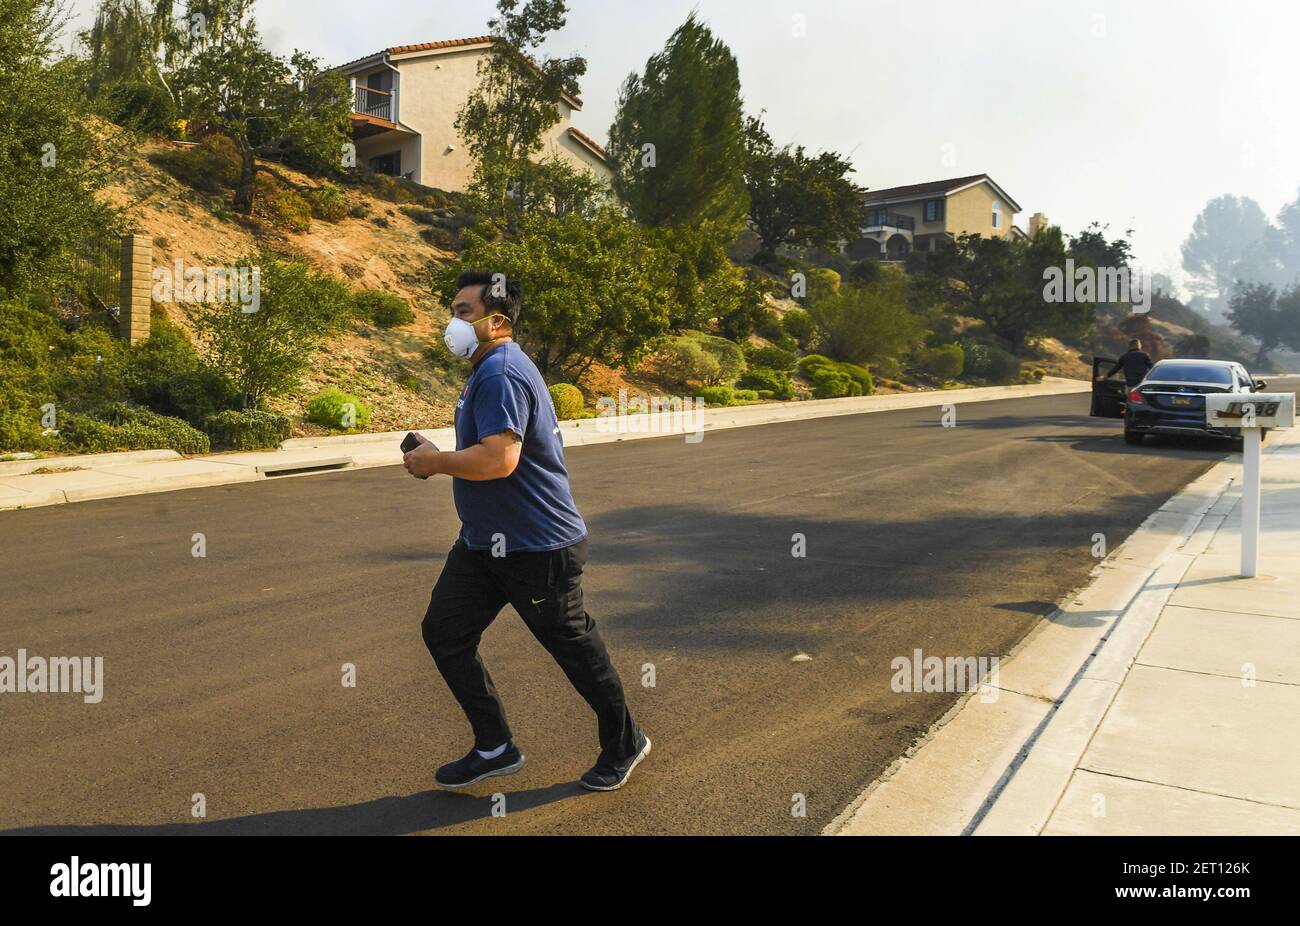 November 9, 2018; Thousand Oaks, CA, USA: A resident wearing a breathing mask runs down Shadow Oaks Place as smoke from flames in a hill above the homes fills the neighborhood. Some residents decided to leave their homes as firefighters kept a watchful eye on the fire. Mandatory Credit: Robert Hanashiro-USA TODAY/Sipa USA Stock Photo